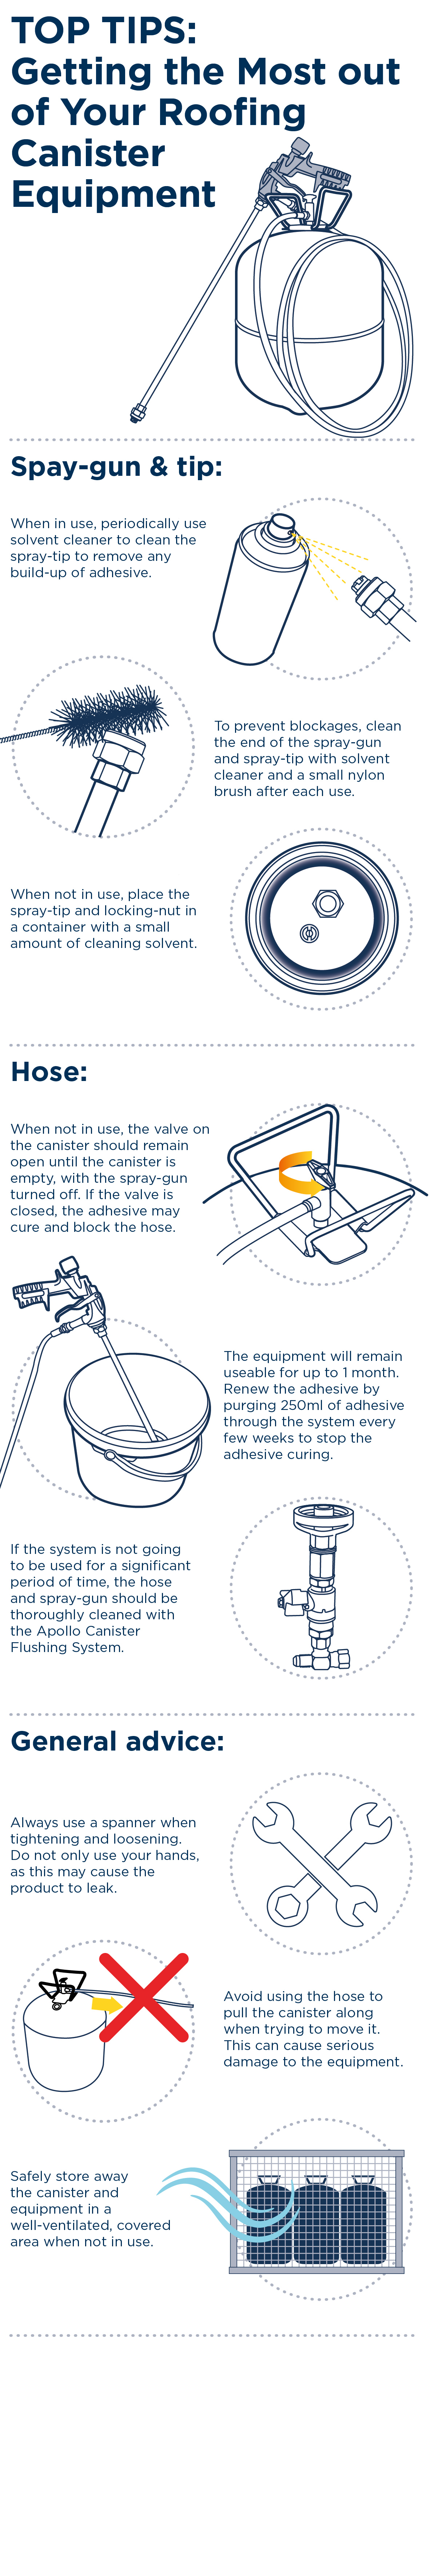 Getting most out of your canister equipment - Infographic